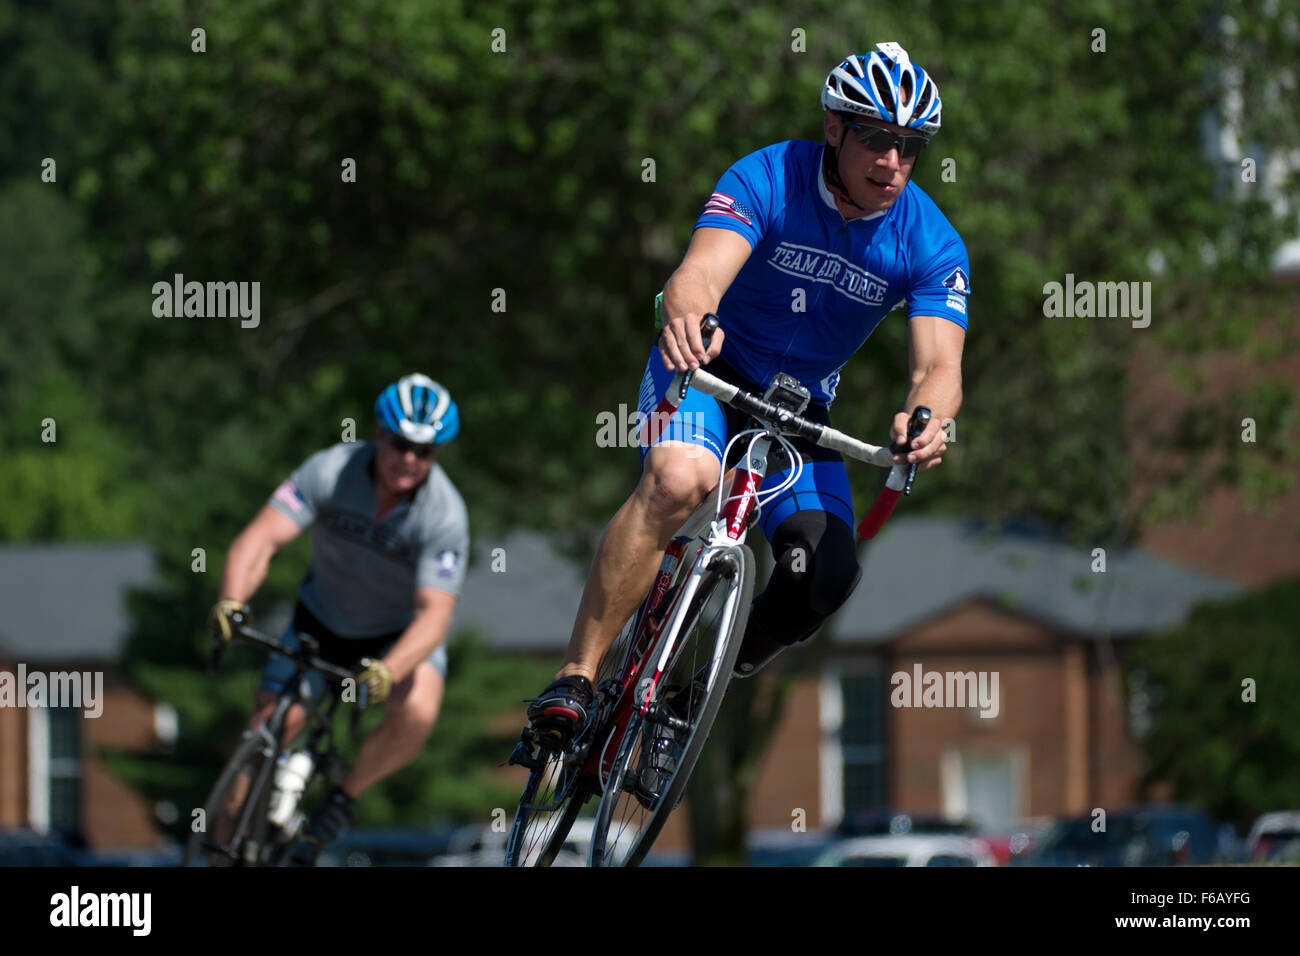 U.S. Air Force Team’s Ben Seekel turns a corner during the 2015 Department of Defense Warrior Games at Marine Corps Base Quantico June 21, 2015. Jimenez won gold in the Men’s H5 Hand Cycle Division. (DoD News photo by EJ Hersom) Stock Photo